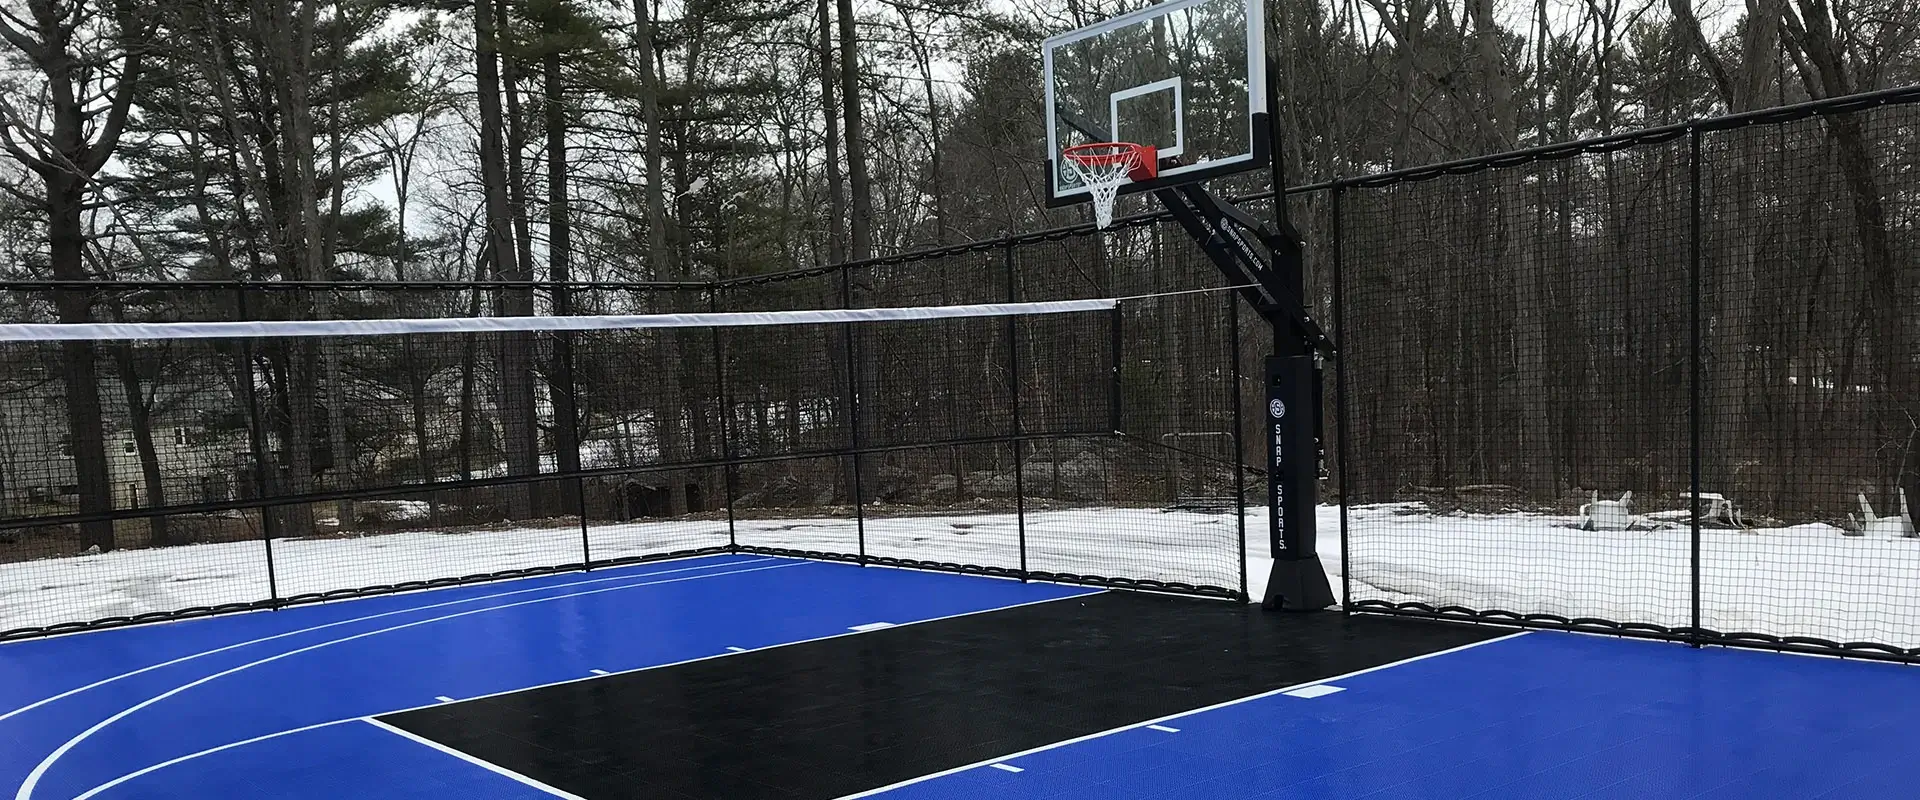 Volleyball court in a snowy backyard